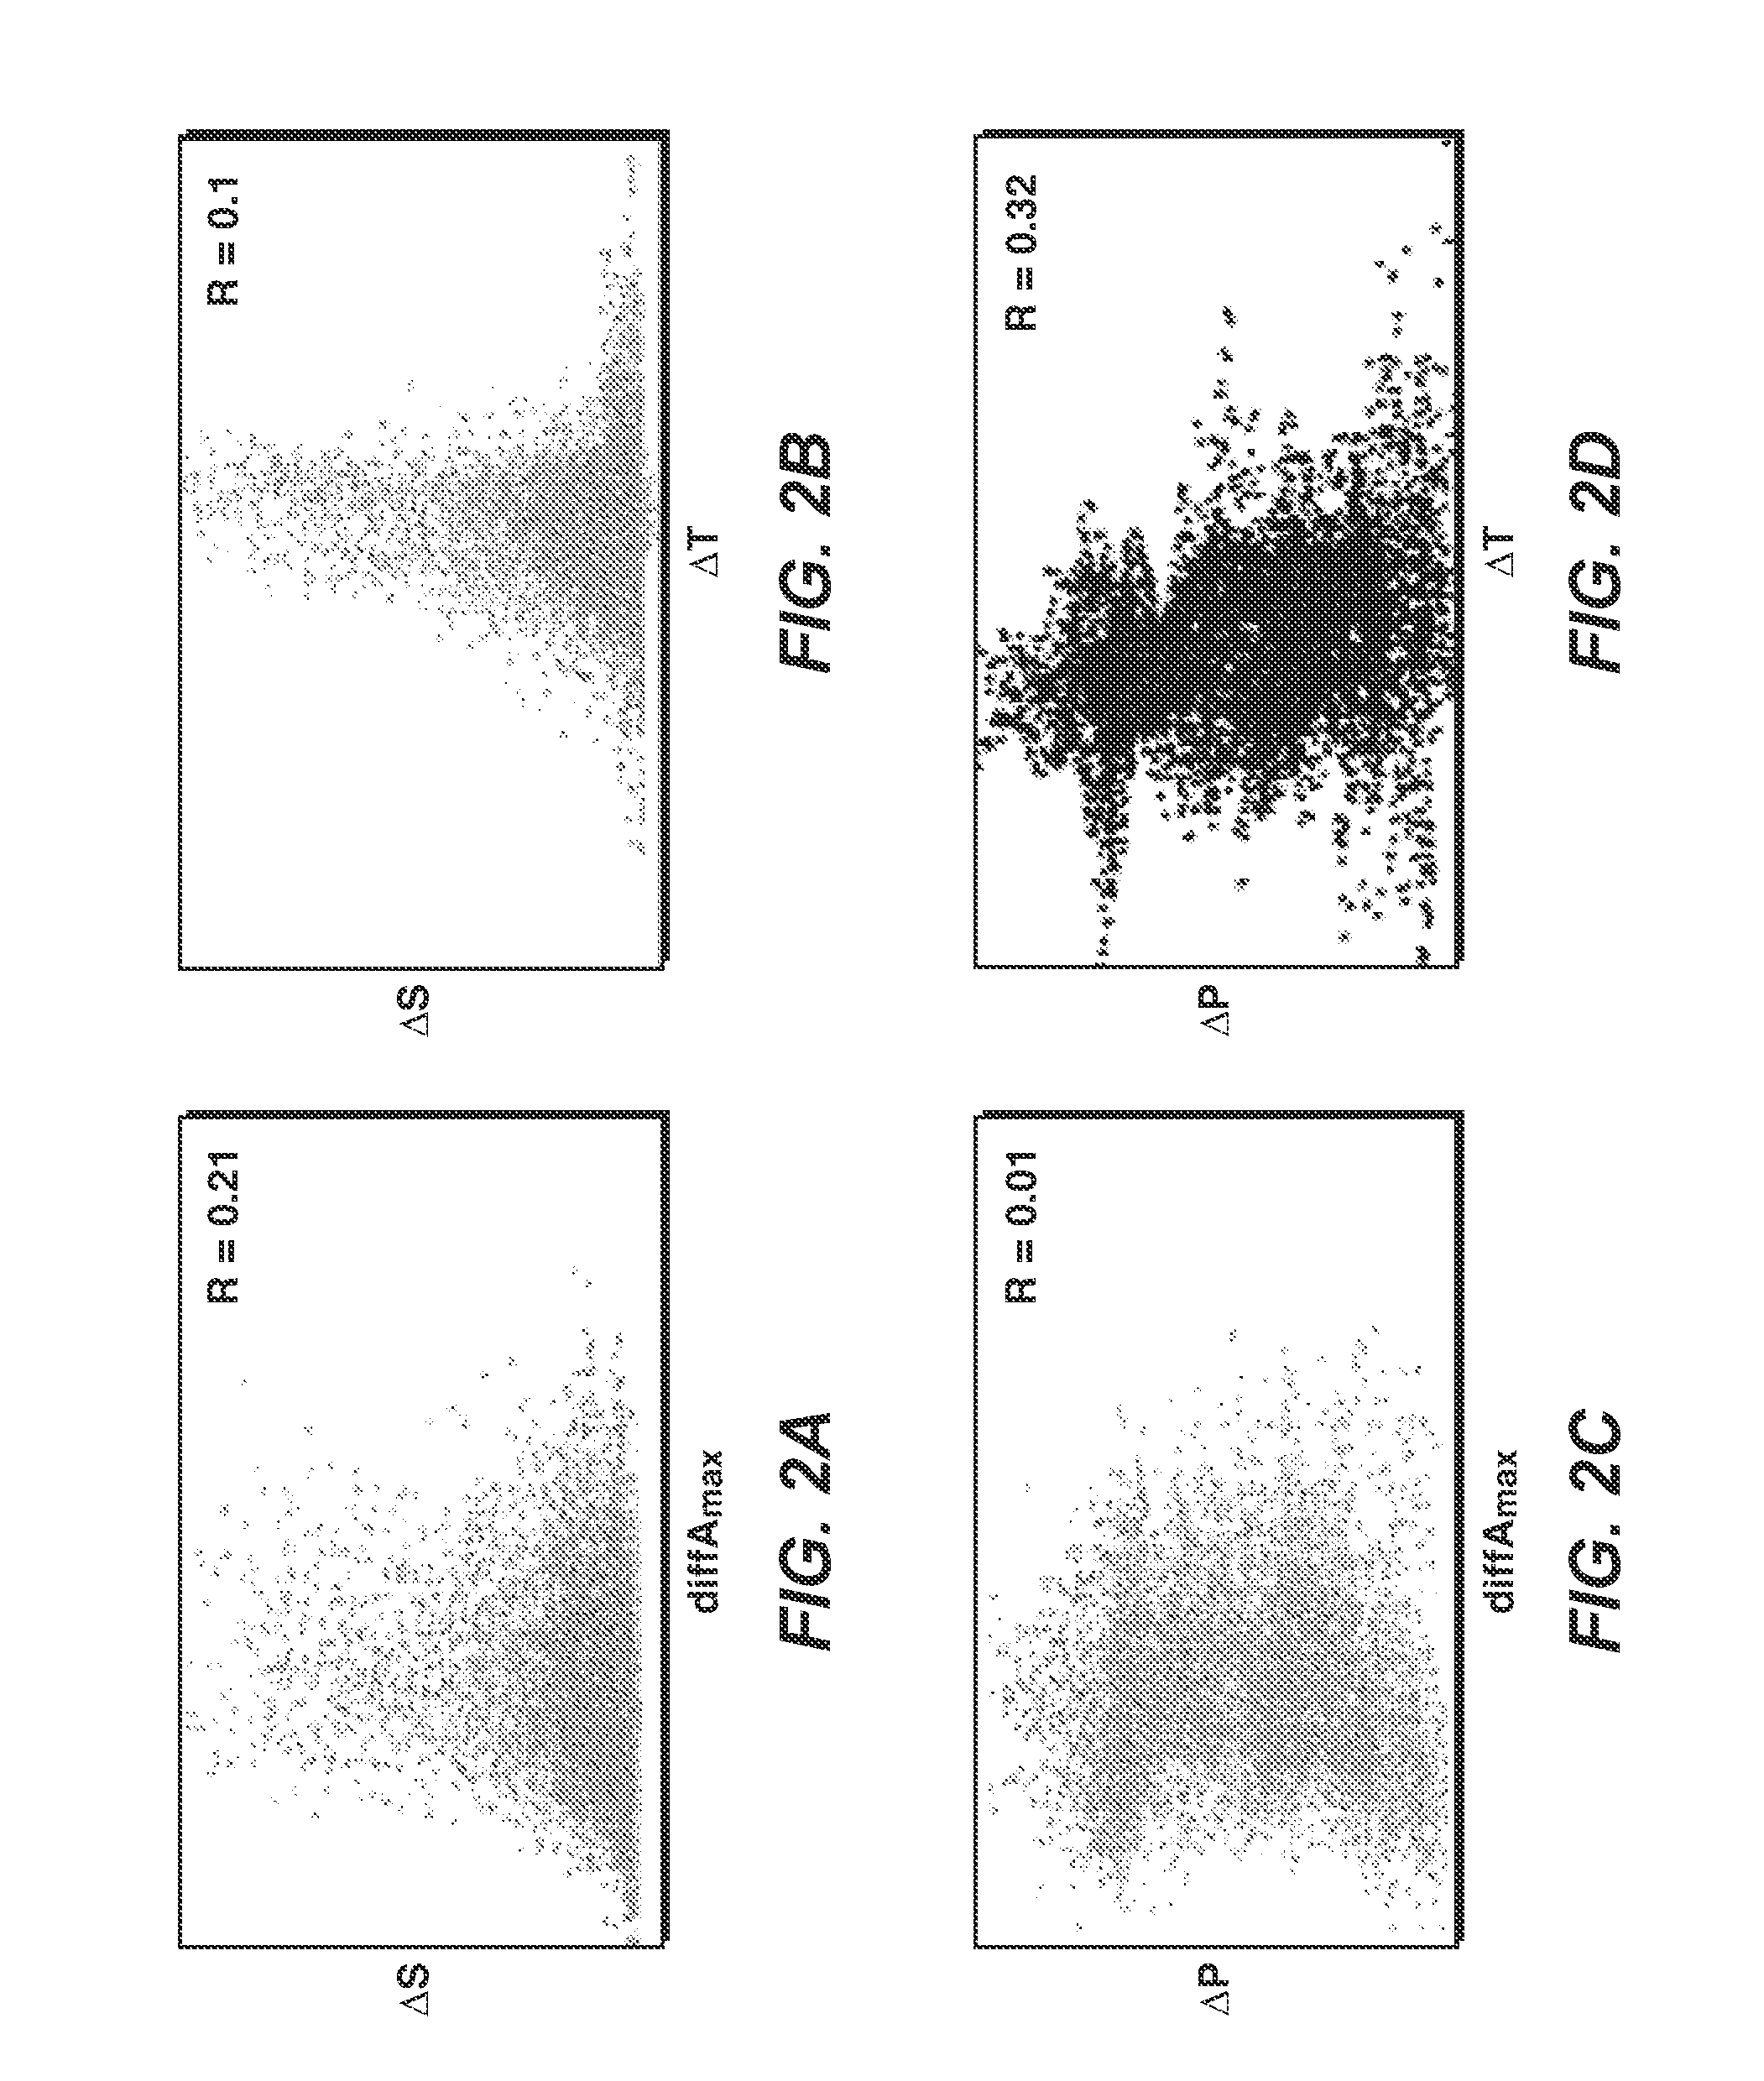 Method for Determining the Fluid/Pressure Distribution of Hydrocarbon Reservoirs from 4D Seismic Data